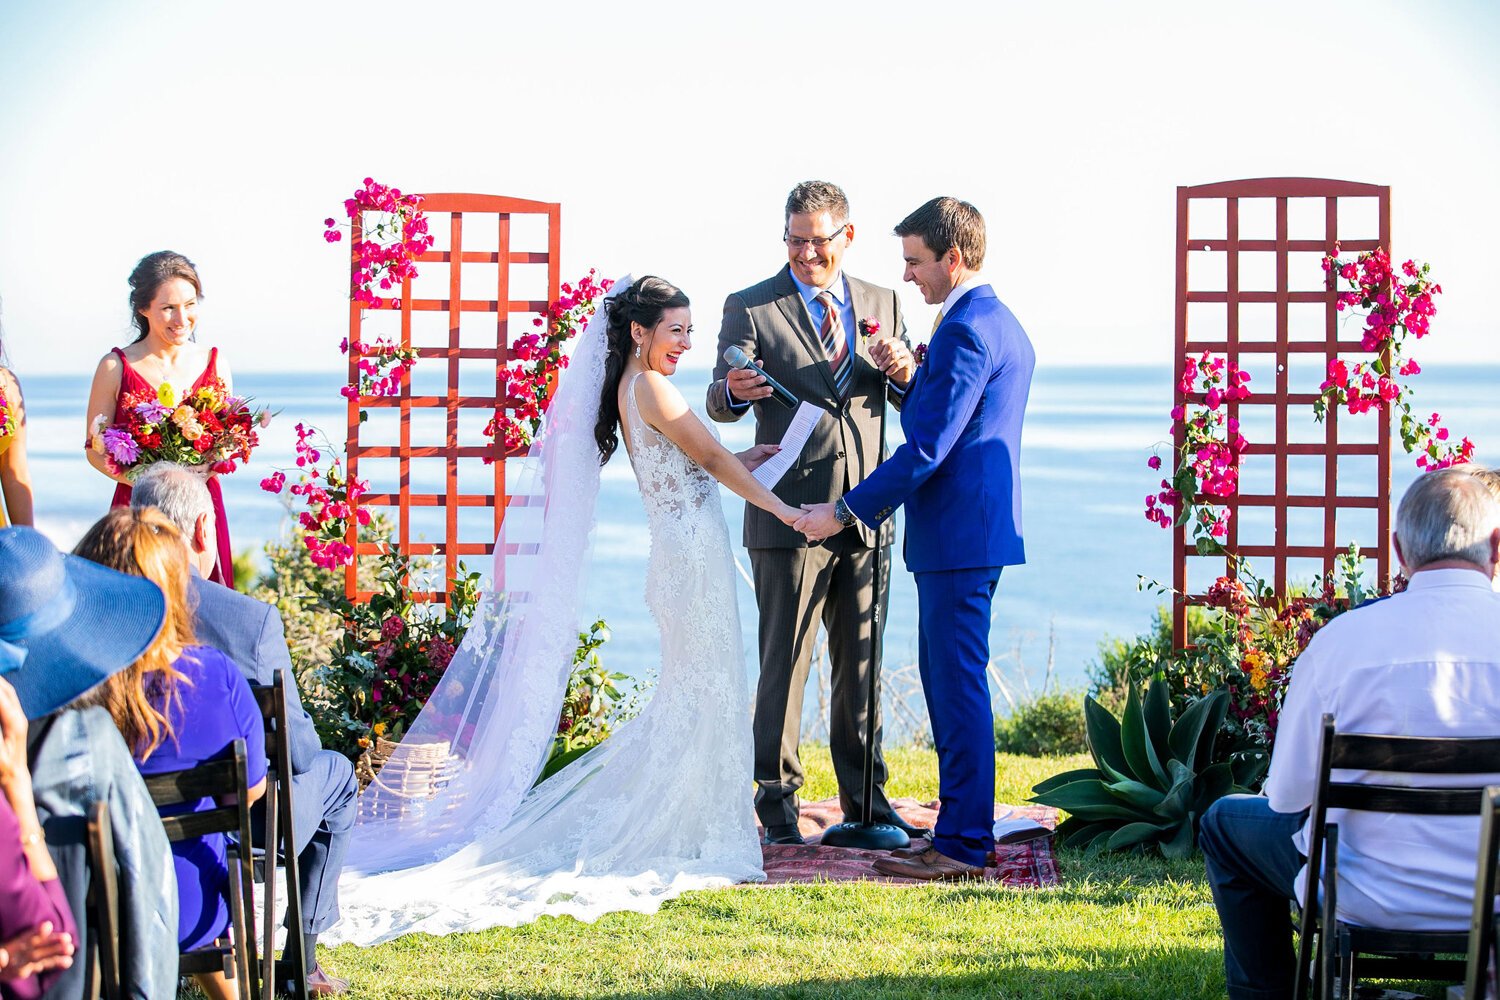 www.santabarbarawedding.com | Nightingale Photography | Rancho Dos Pueblos | Wild Hearts Events | TEAM Hair &amp; Makeup | Knot Just Flowers | The Ceremony 